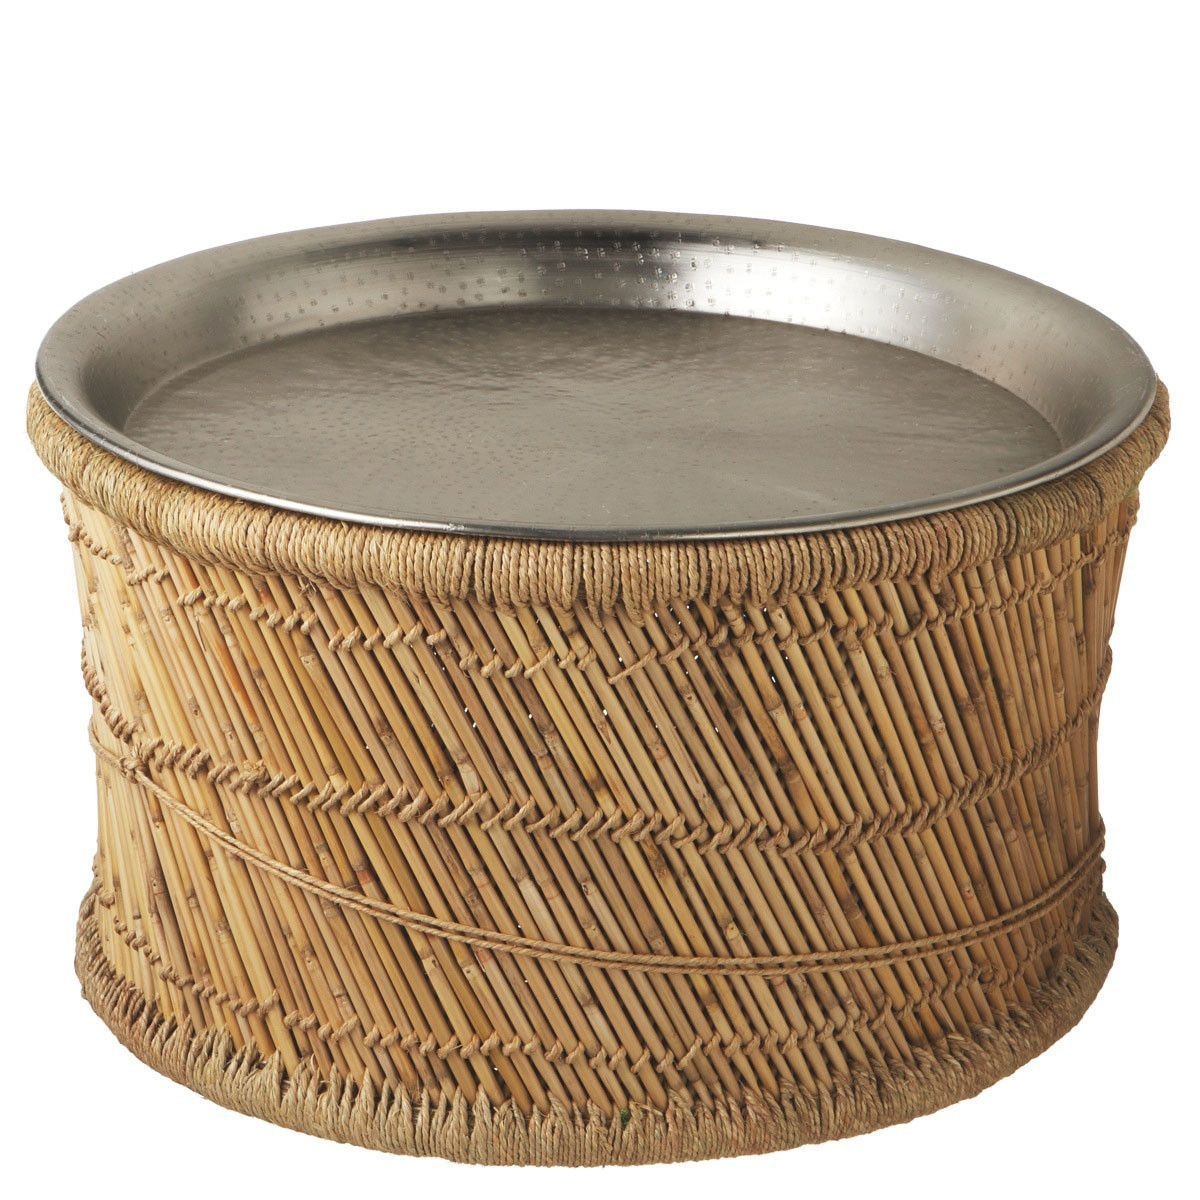 29" Exotic Tropical Bamboo Woven Round Coffee Table with Metal Tray Top